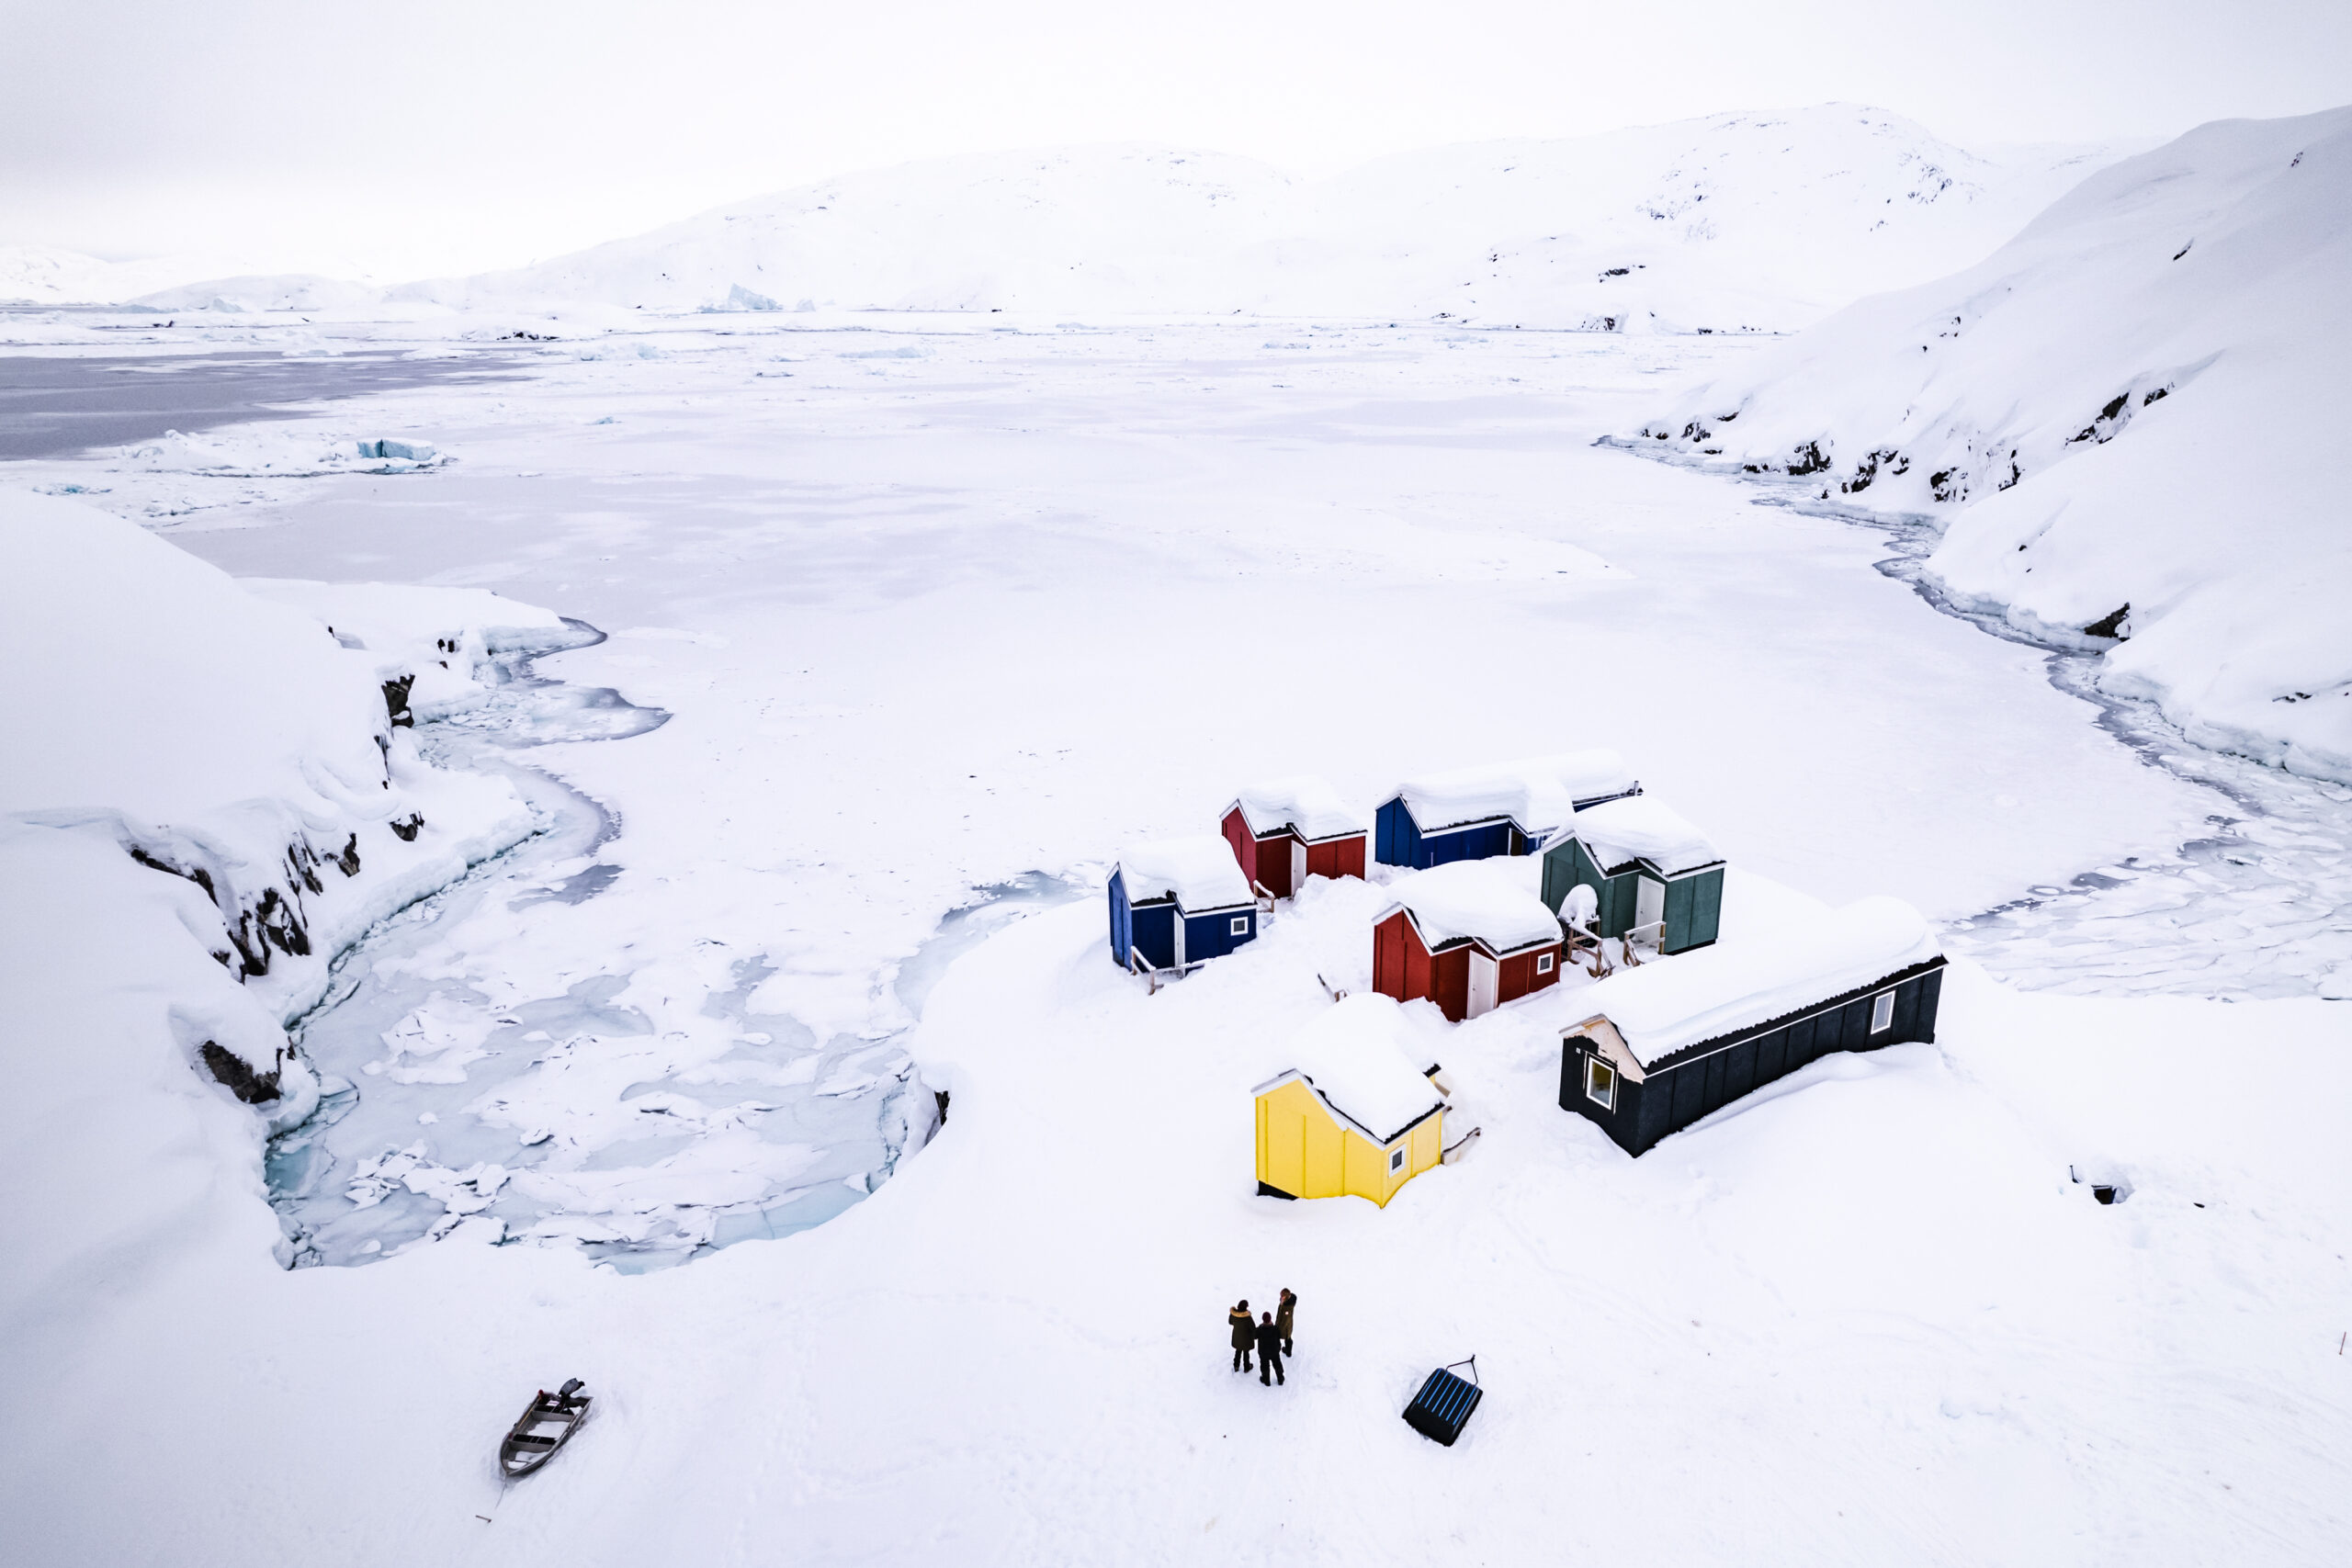 The Ice Camp during winter. Photo by Aningaaq Rosing Carlsen - Visit Greenland